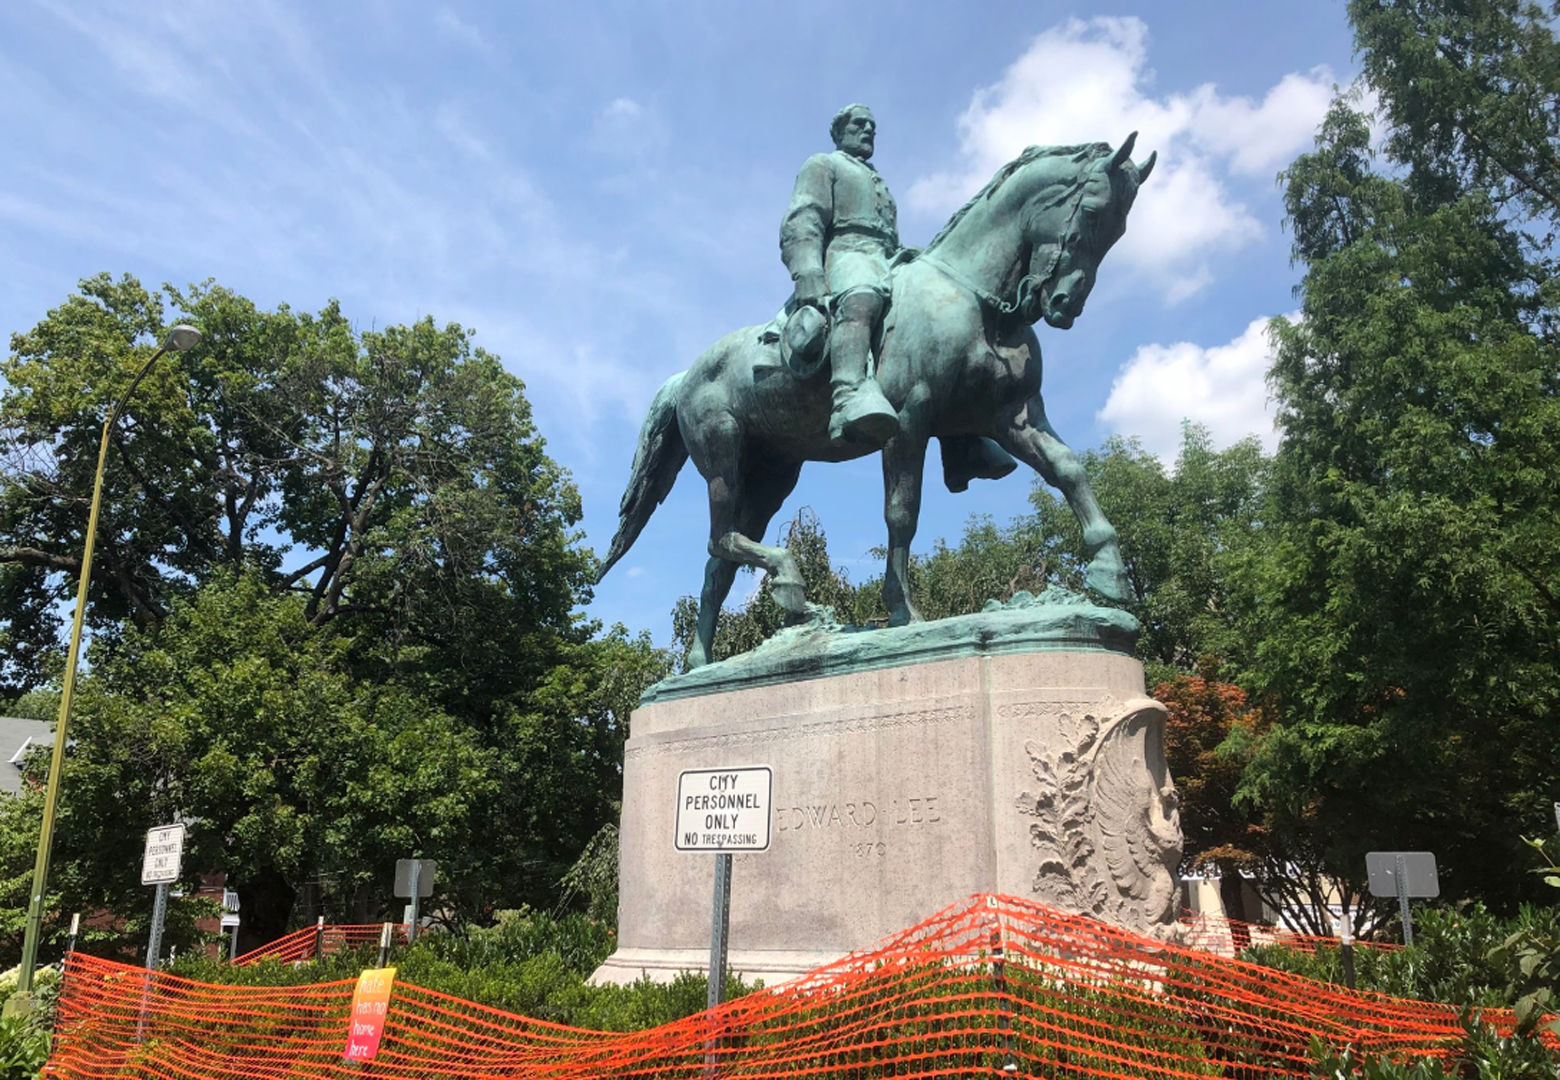 Mesh fencing was placed around the statue of Robert E. Lee in Charlottesville. (WTOP/Max Smith)